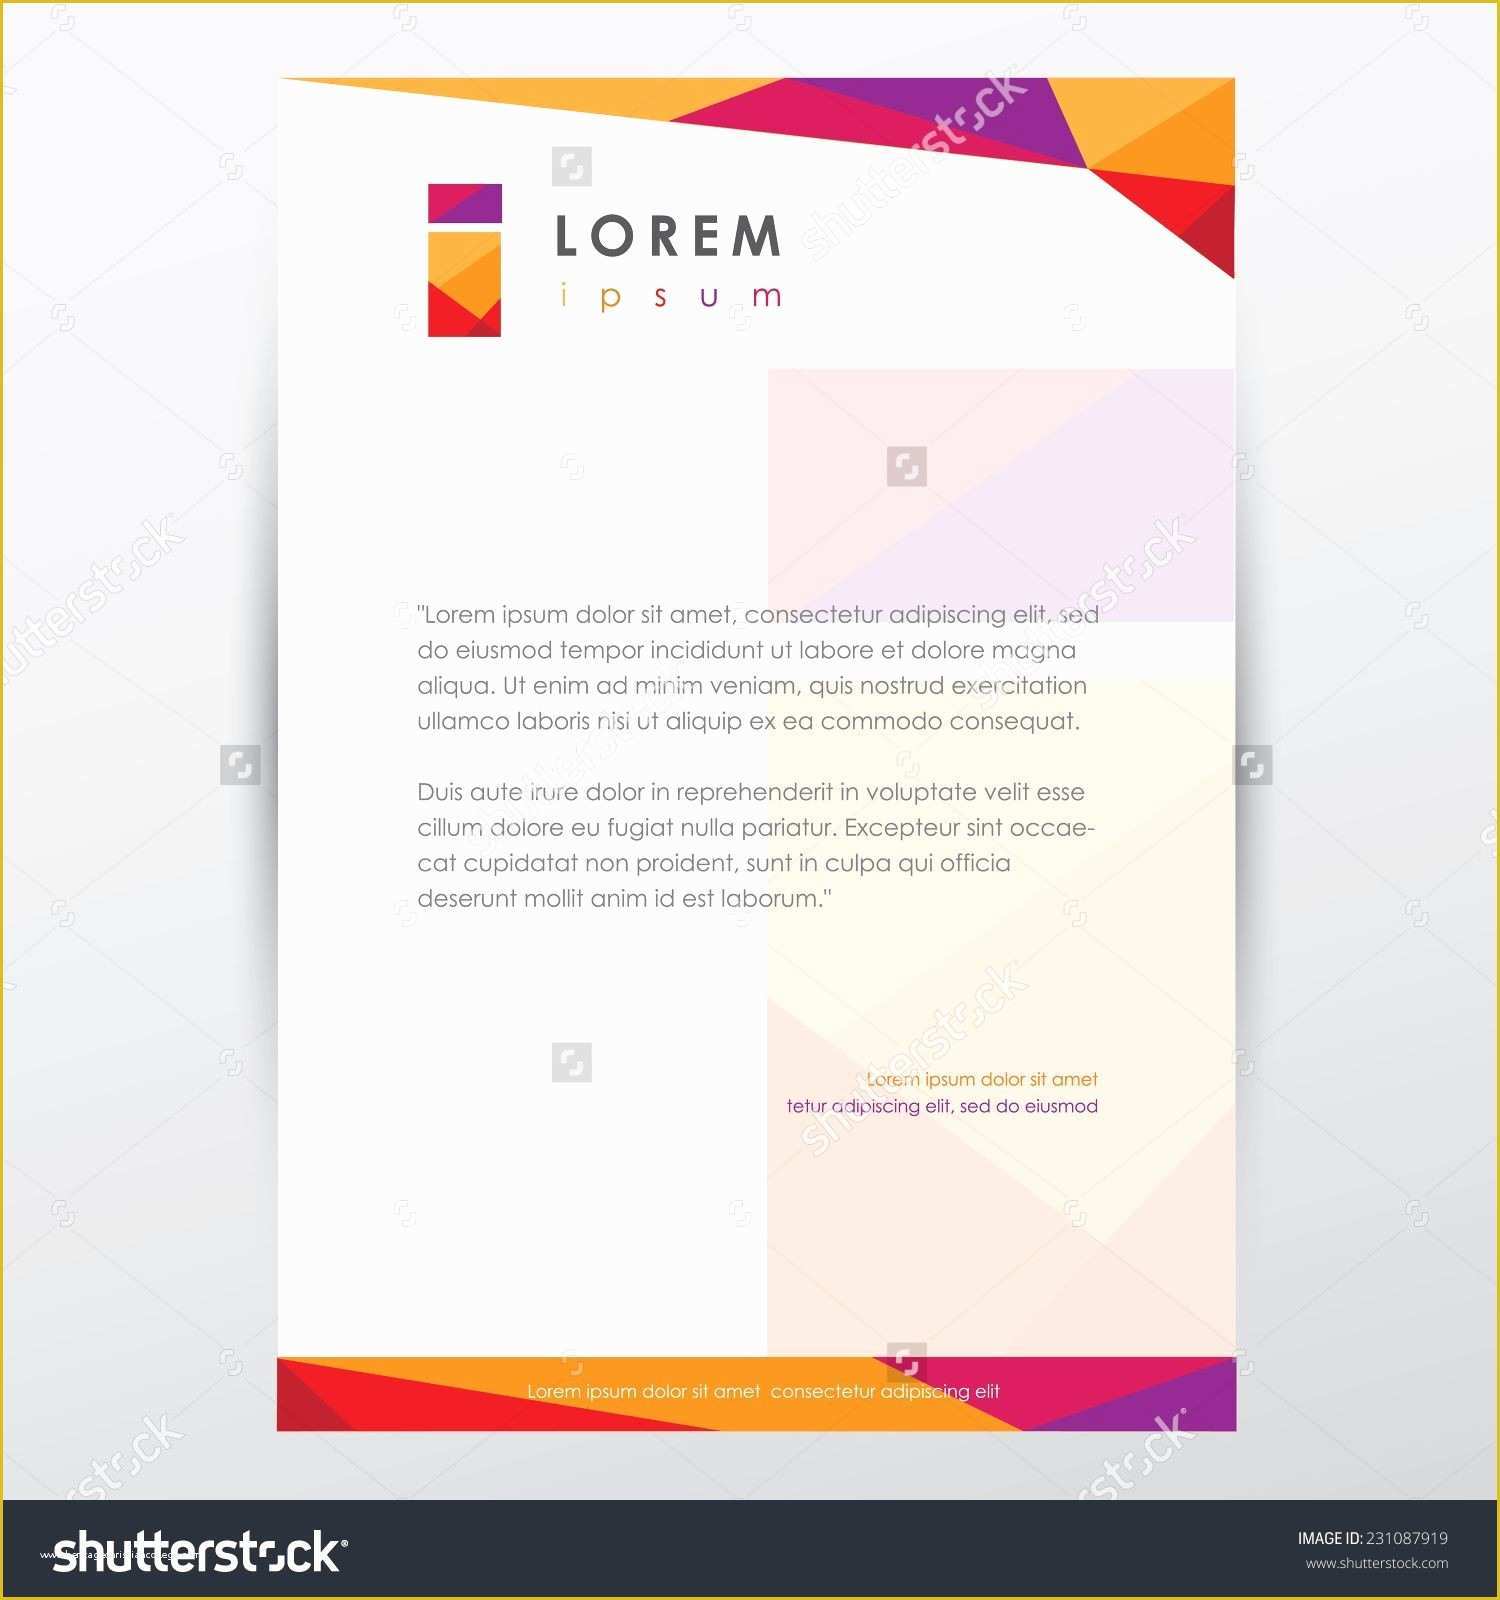 Free Letter Design Templates Of Business Letterhead Design Templates Free Download